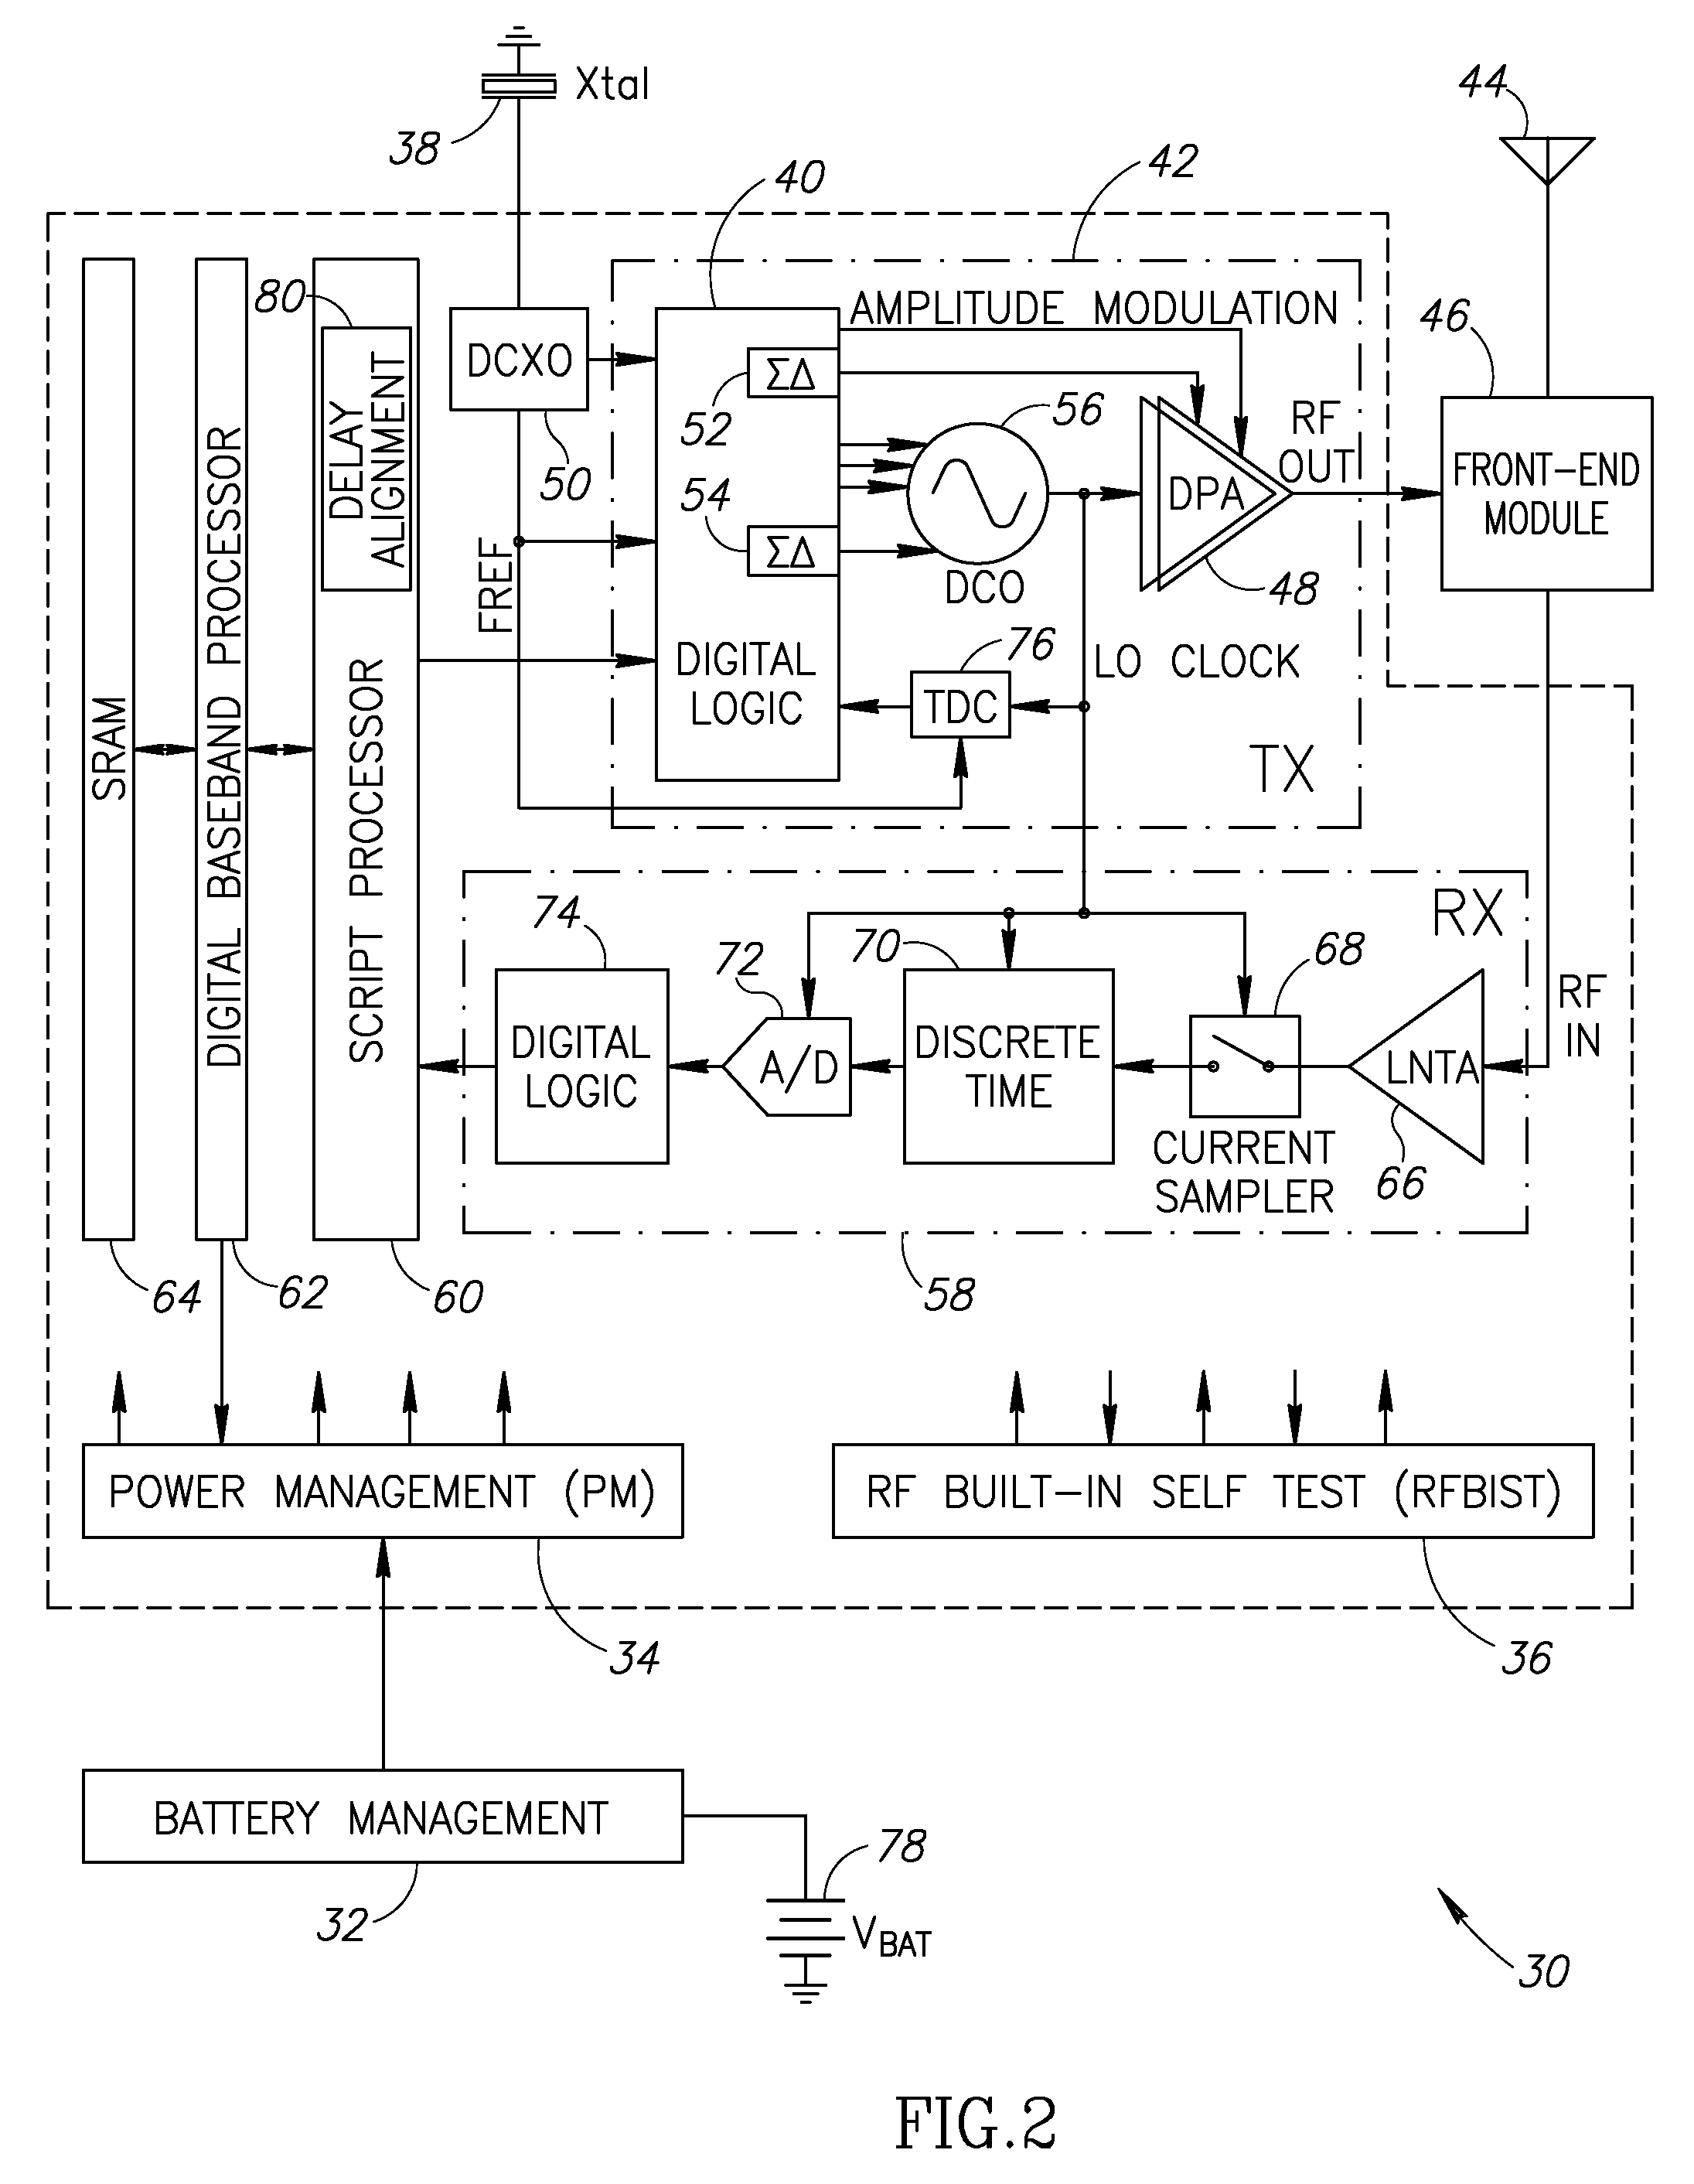 Delay alignment in a closed loop two-point modulation all digital phase locked loop